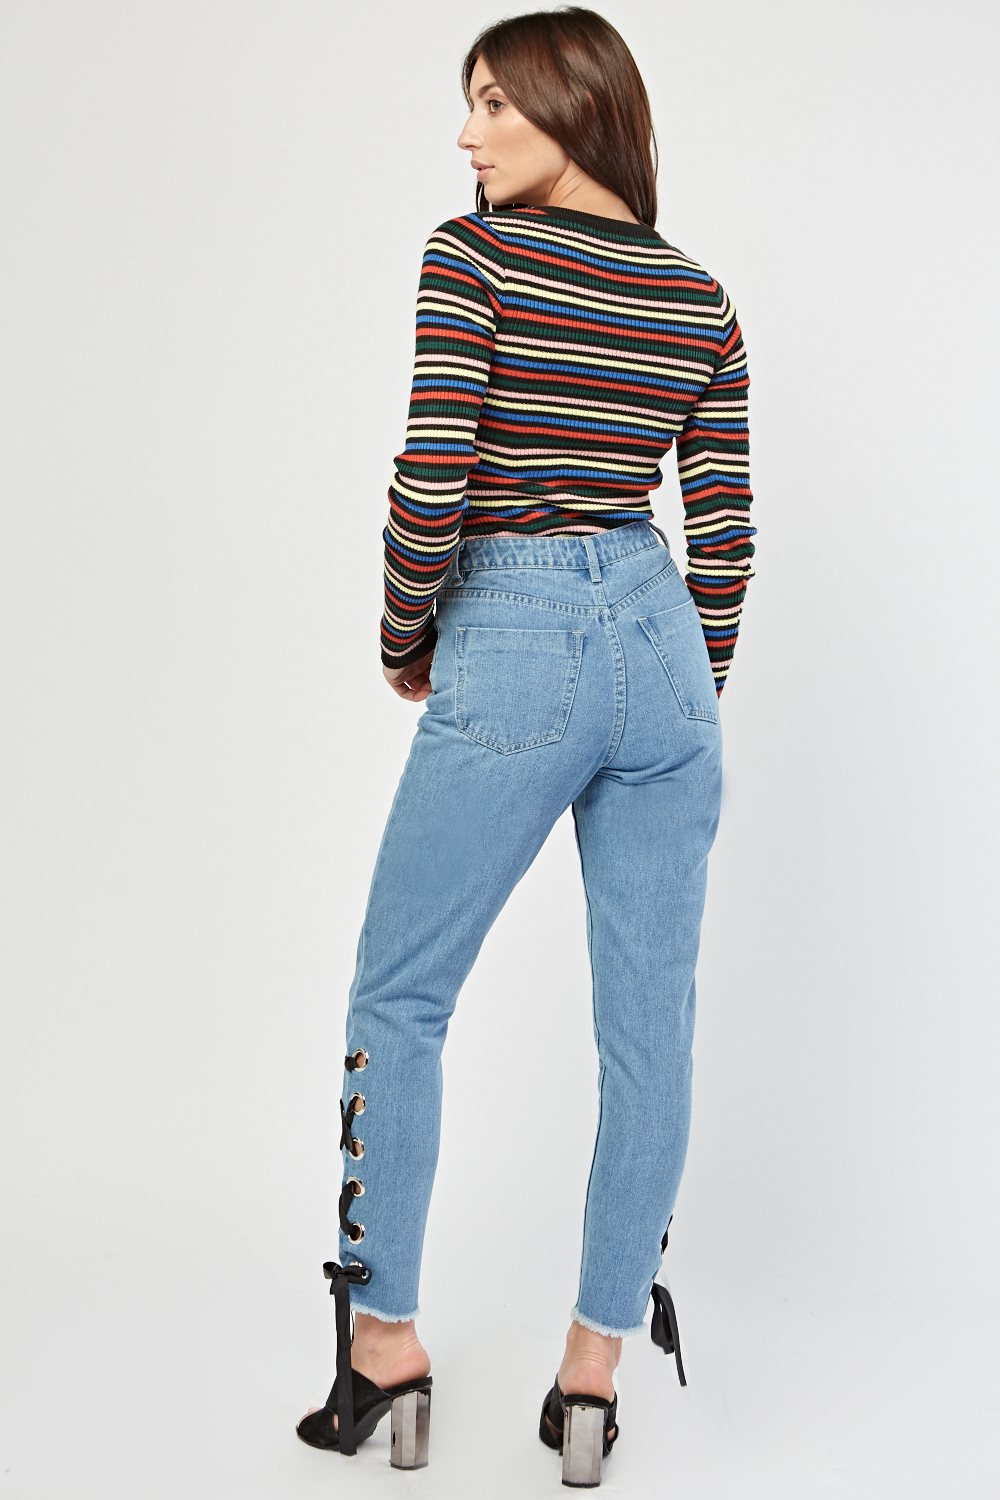 Lace Up Eyelet Trim Jeans - Just $3